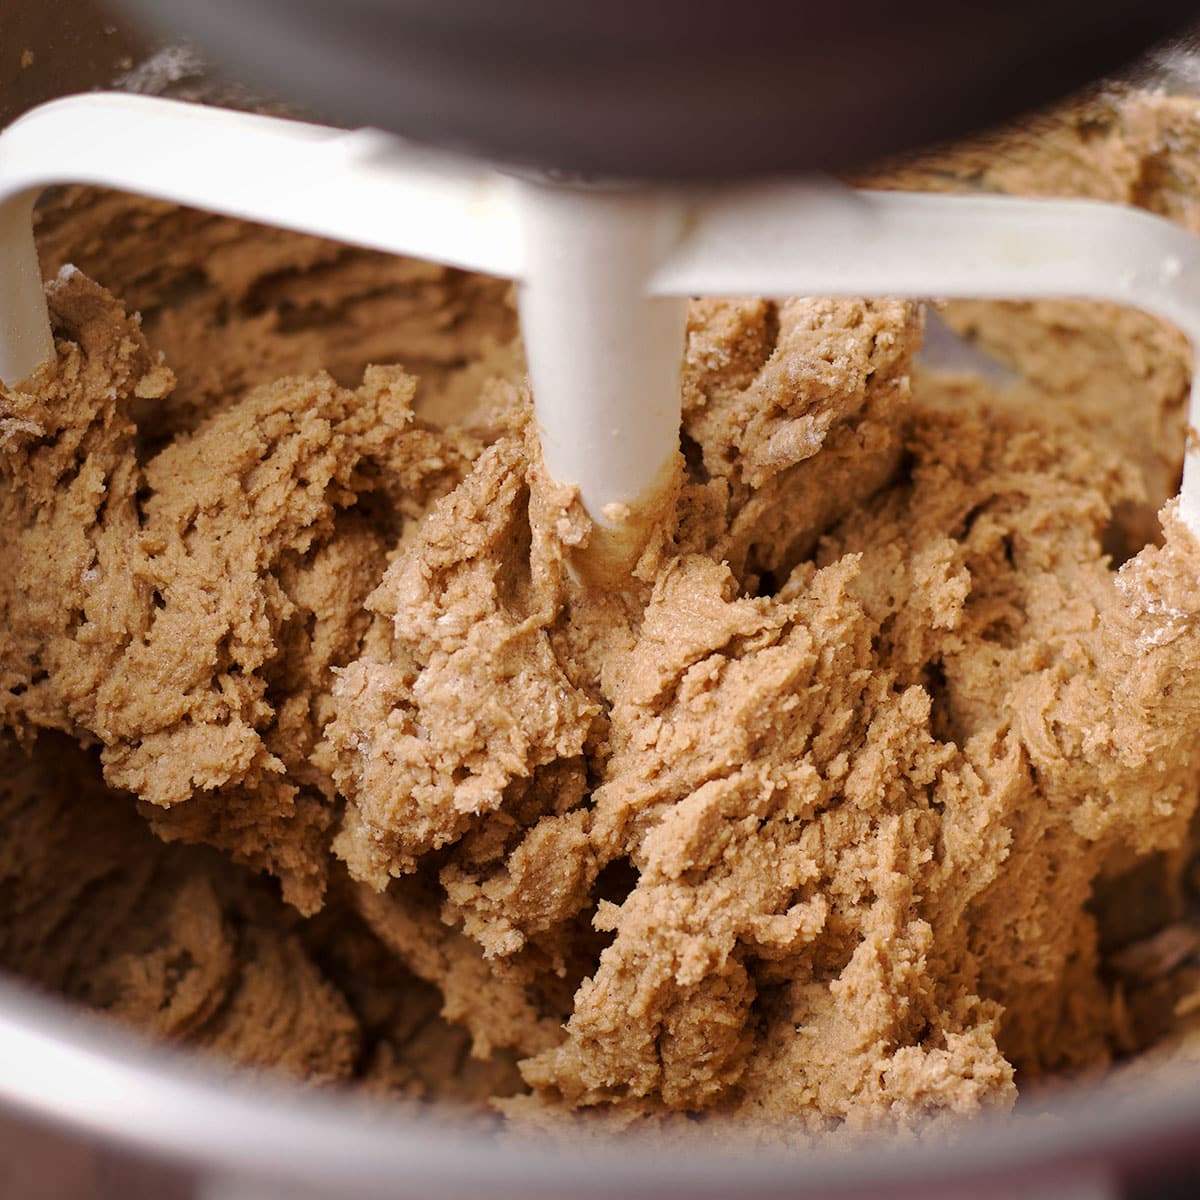 Using an electric mixer to gently mix the dry ingredients into brown sugar cookie dough.